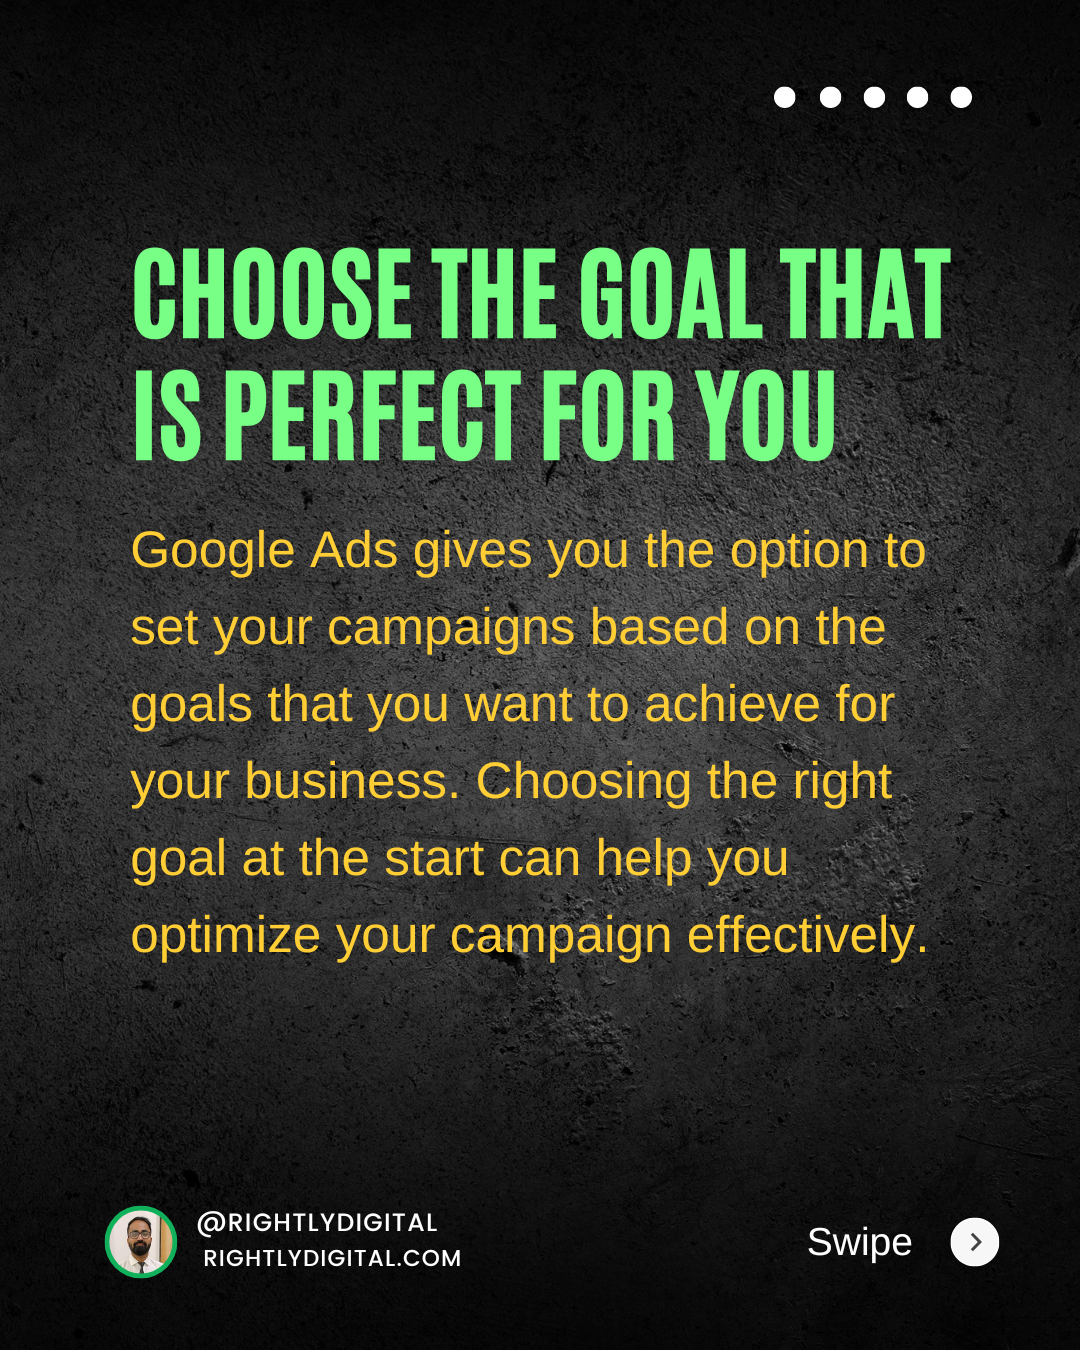 Google Ads gives you the option to set your campaigns based on the goals that you want to achieve for your business. Choosing the right goal at the start can help